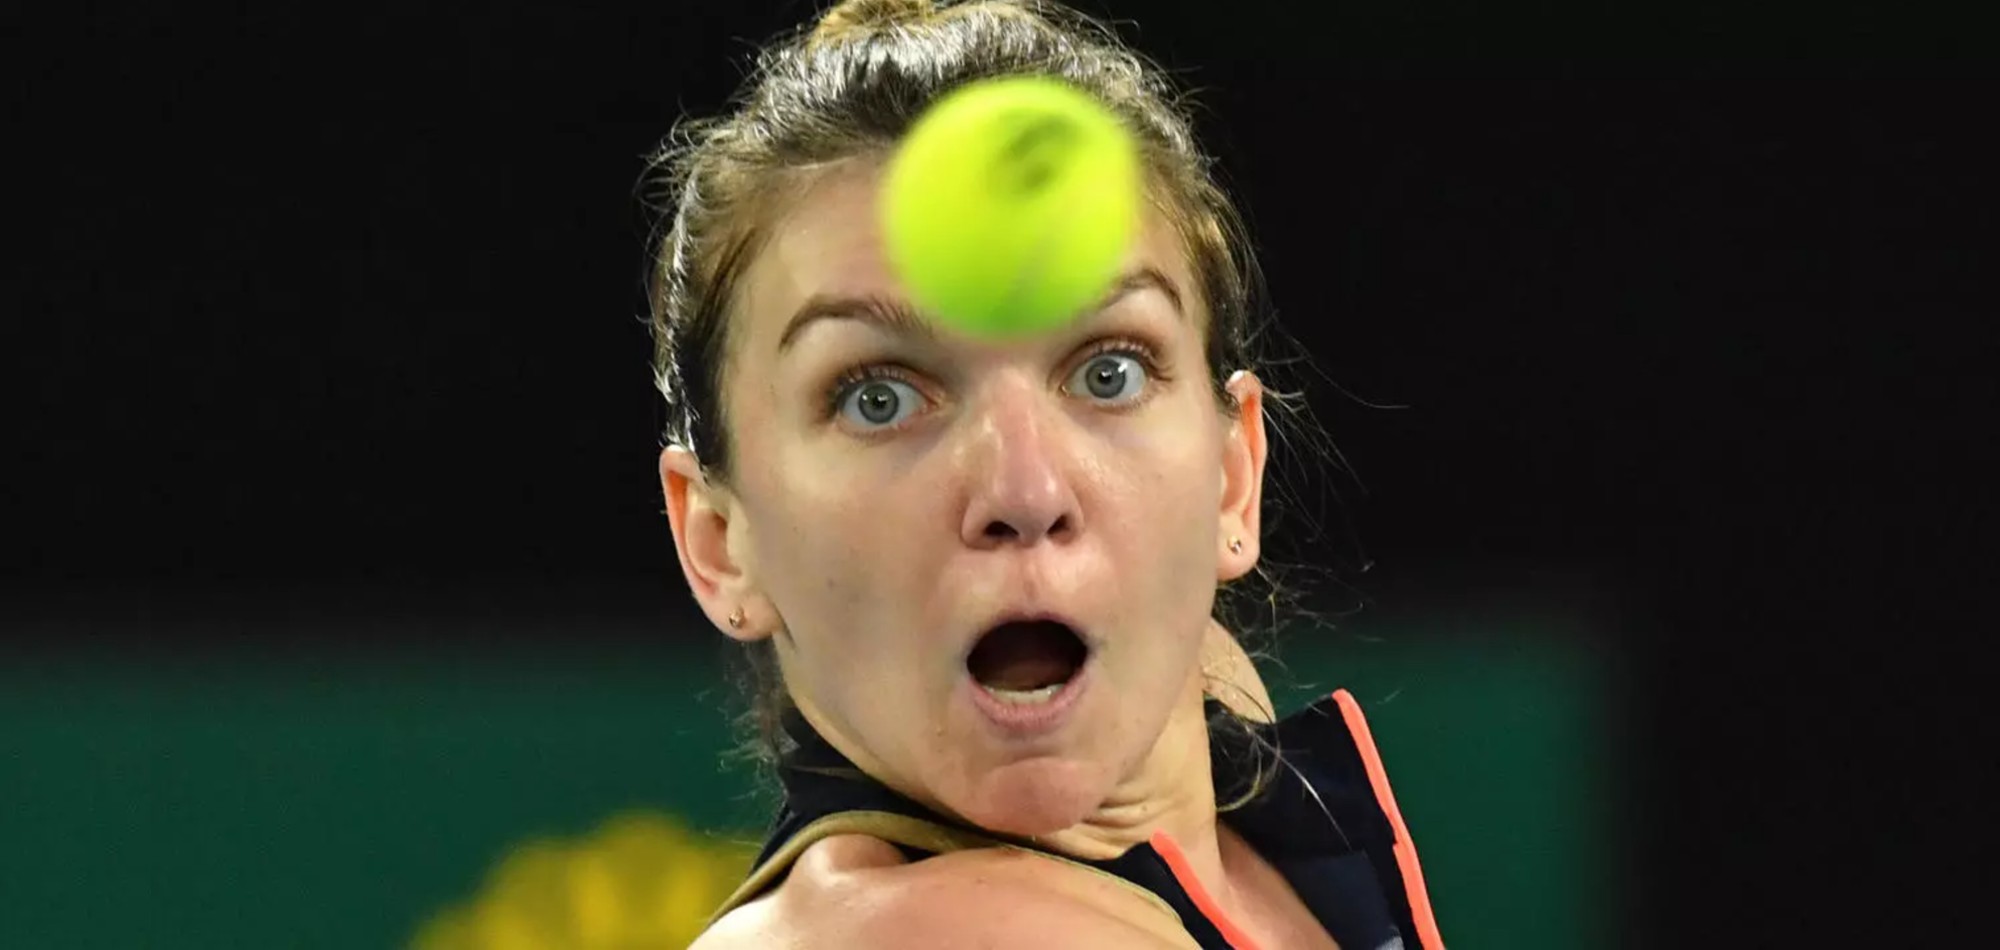 Halep pulls out of Qatar Open